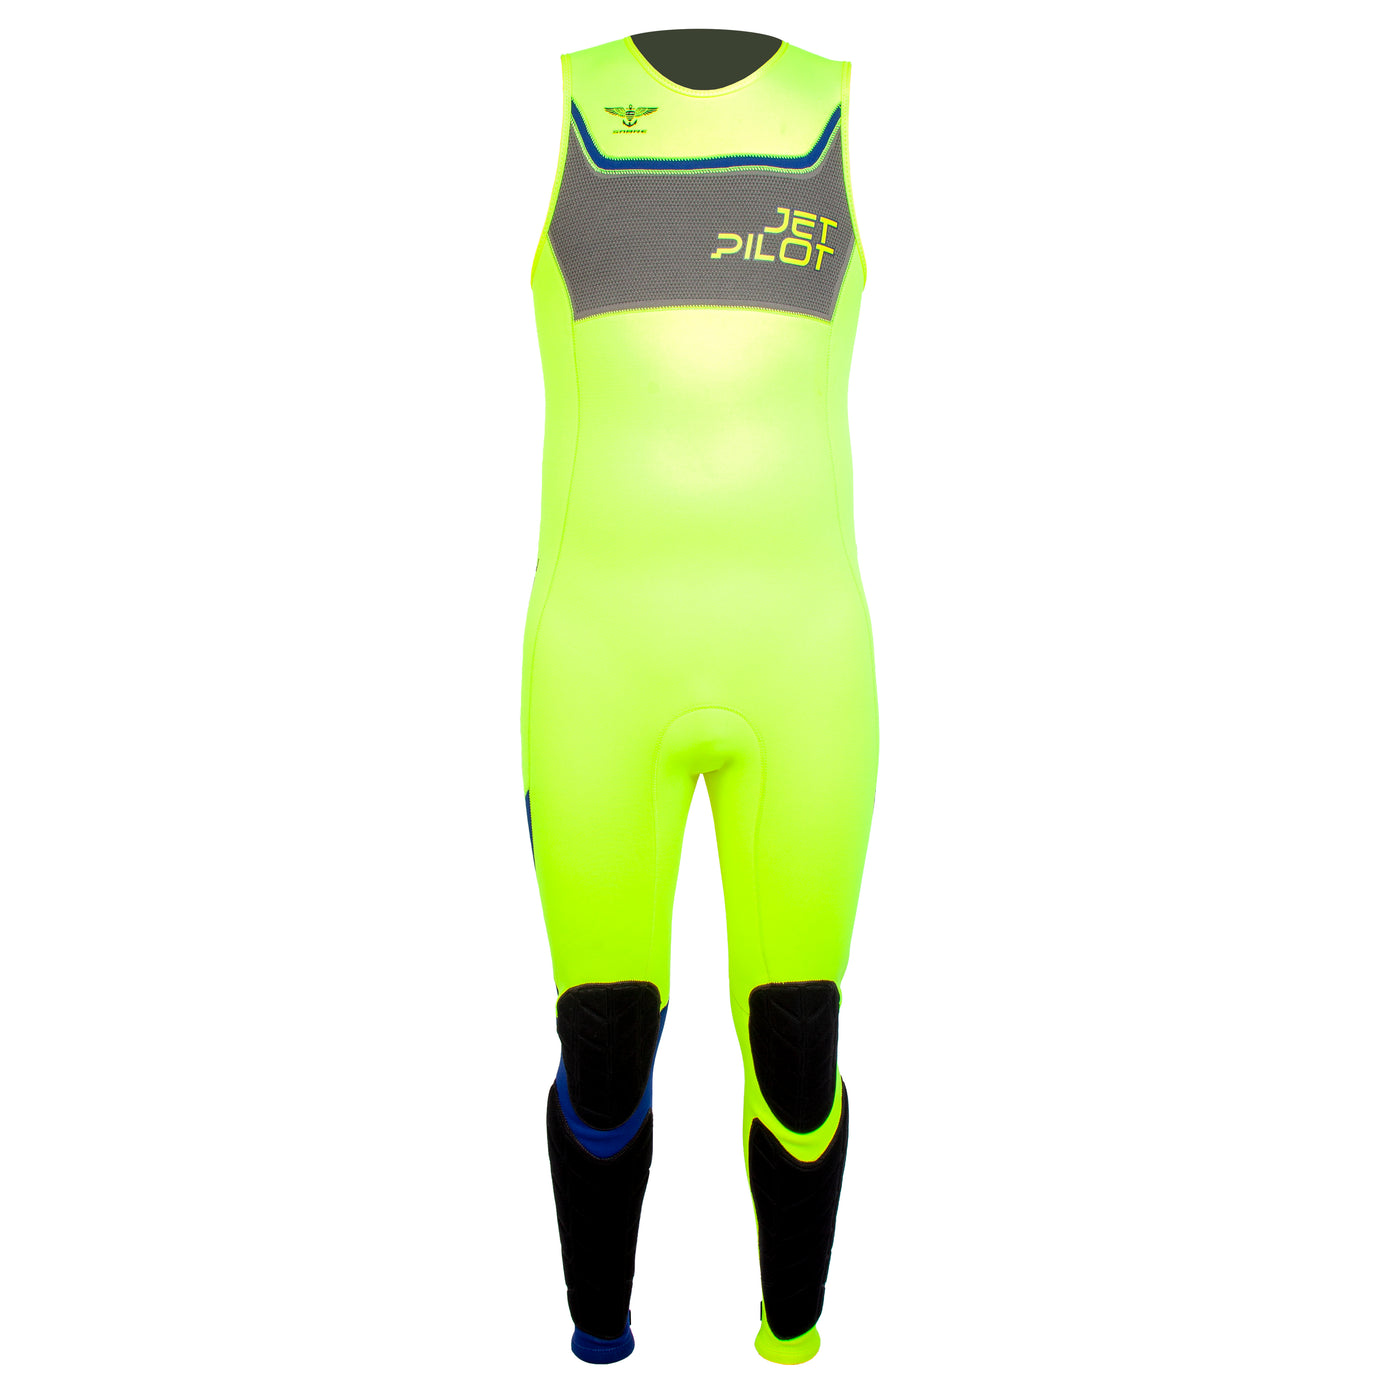 Front view of the Jetpilot F-86 Sabre John wetsuit Neon colorway.